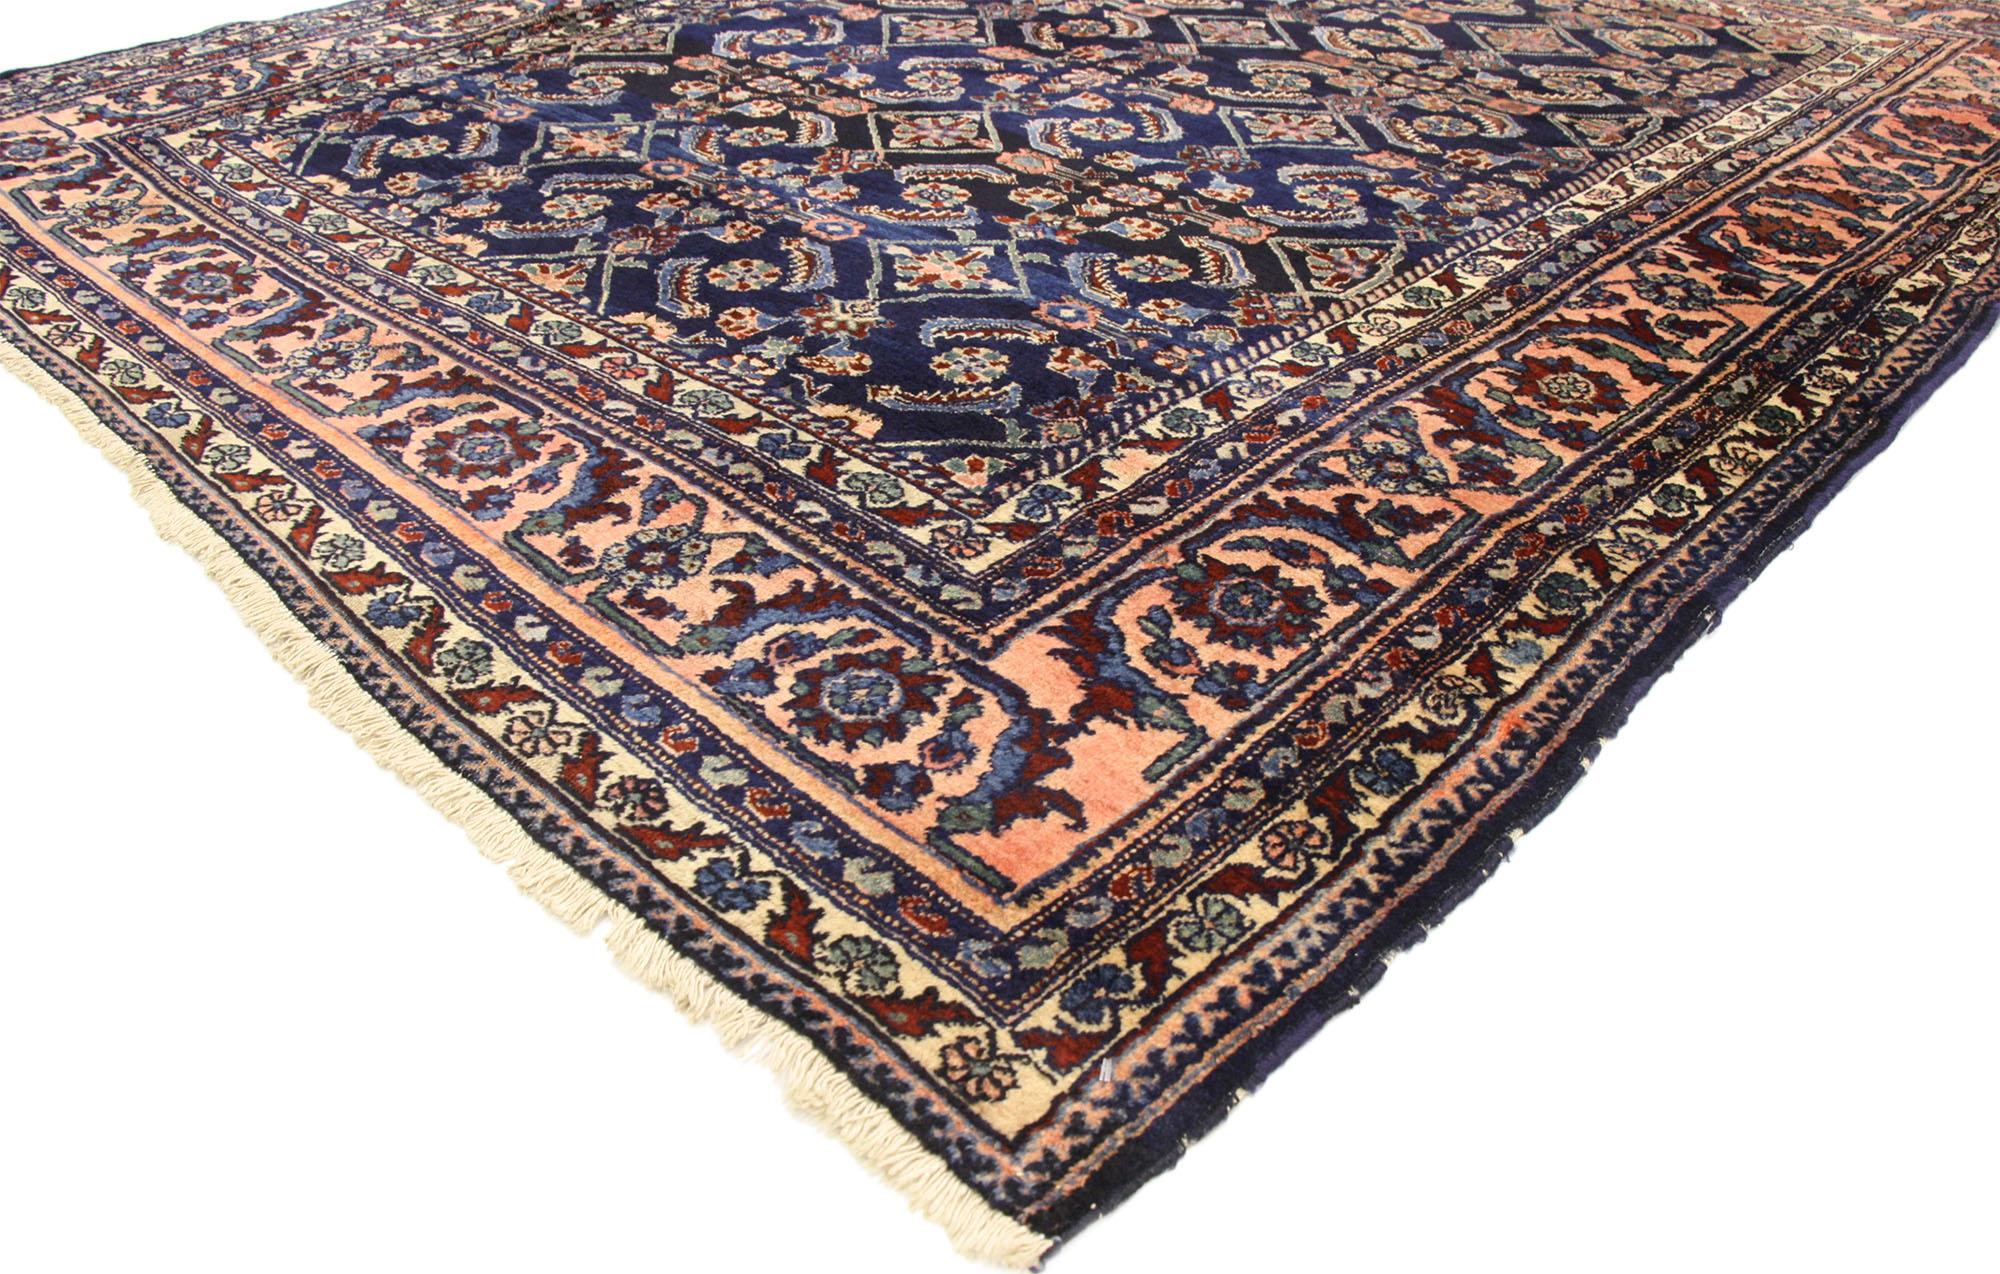 71894 Antique Persian Lilihan Rug with Traditional Modern Style 05'06 x 06'04. With ornate details, well-balanced symmetry and refined colors, this hand-knotted wool antique Persian Lilihan rug astounds with its beauty. Highlighting an all-over